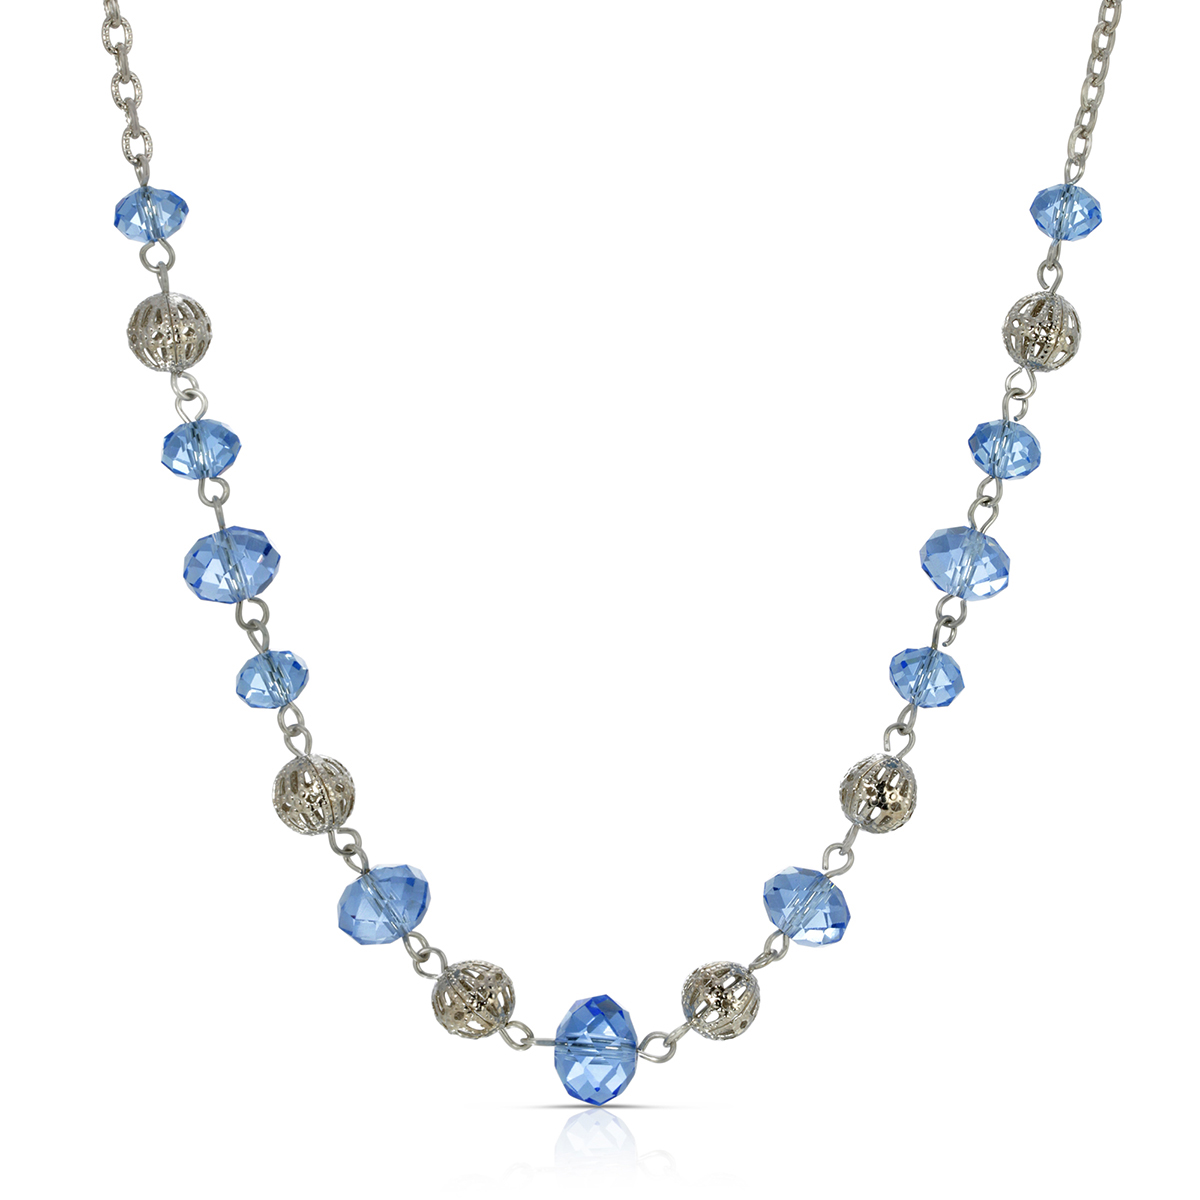 1928 Silver Tone Blue & Silver Beaded Necklace